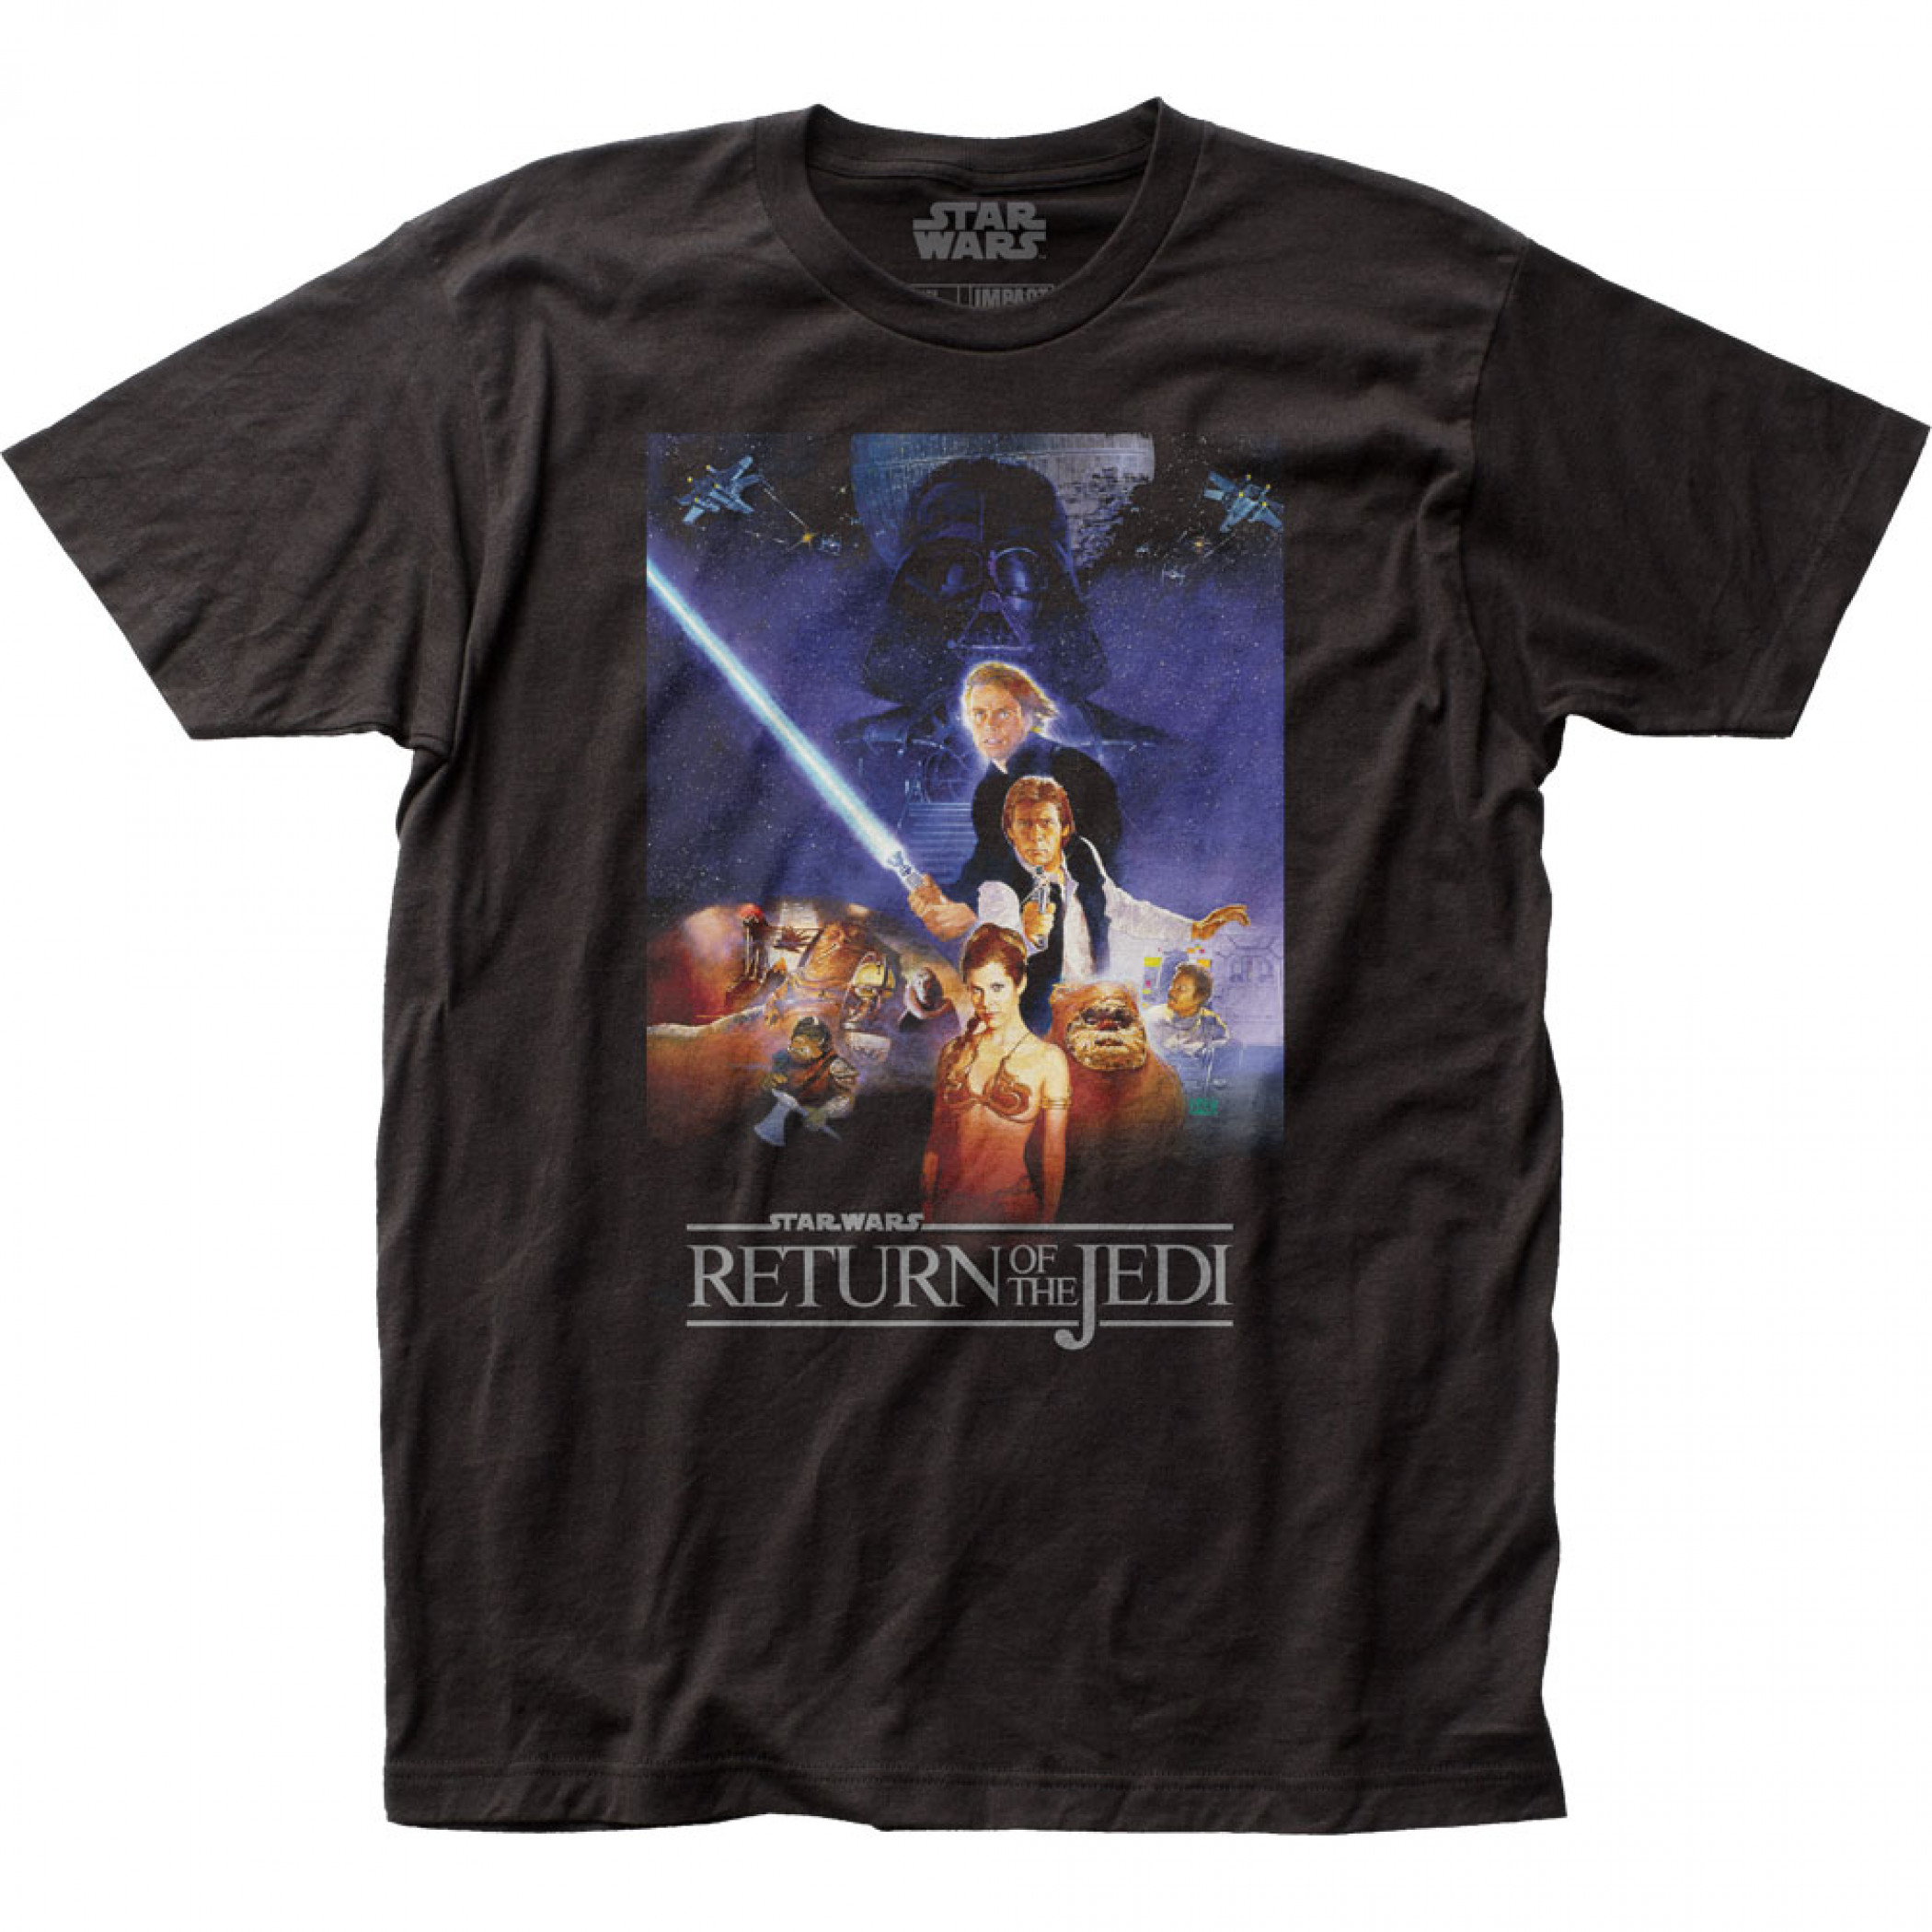 Star Wars The Return of the Jedi Movie Poster T-Shirt